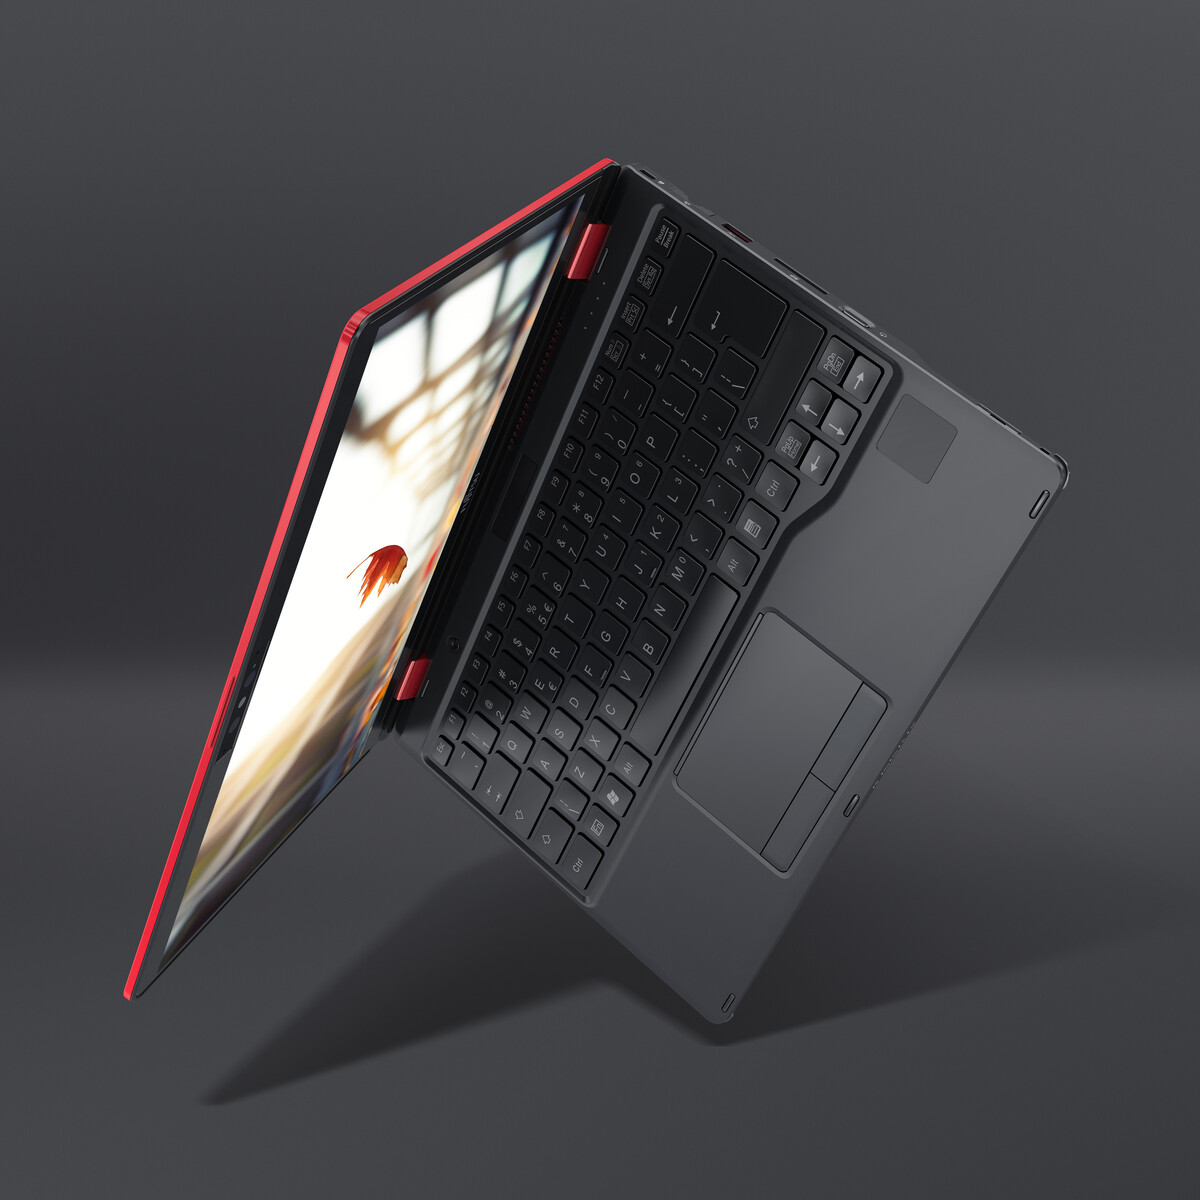 csm_RS68772_LIFEBOOK_U9310X_red_edition_right_side_flipped_Screen_content_1c1ff358b8.jpg